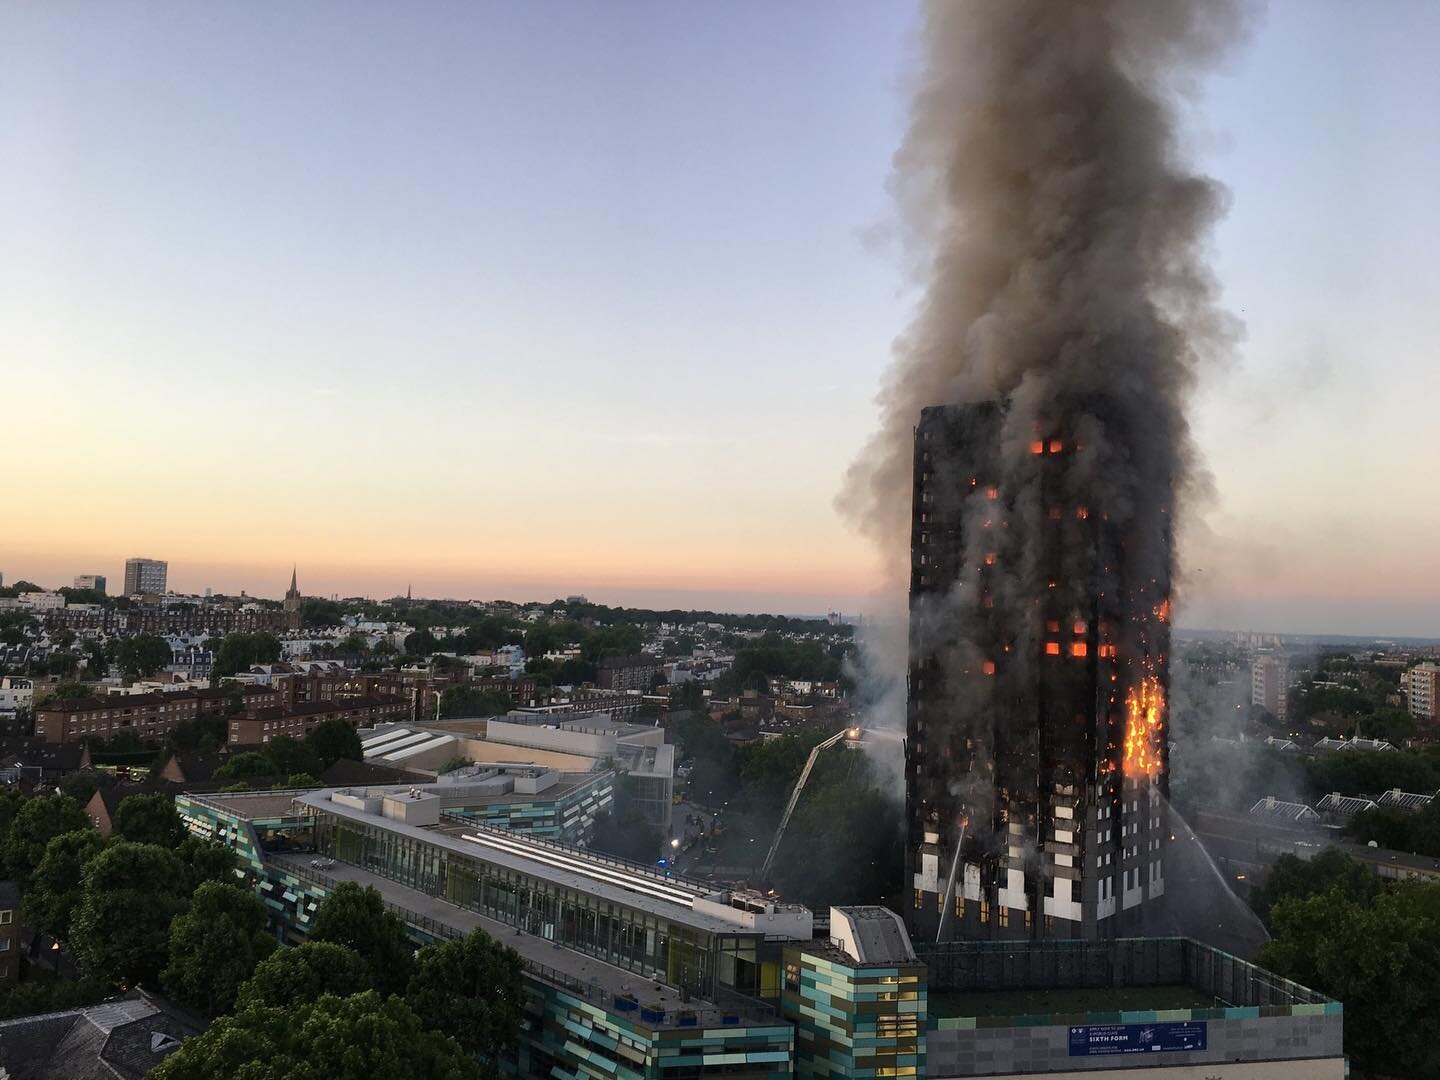 &ldquo;Grenfell should have been a catalyst for change, but things are only getting worse&rdquo; - I spoke to Yvette Williams, MBE &amp; co-founder of #Justice4Grenfell, about that horrific night and the moments of frustration, as well togetherness, 